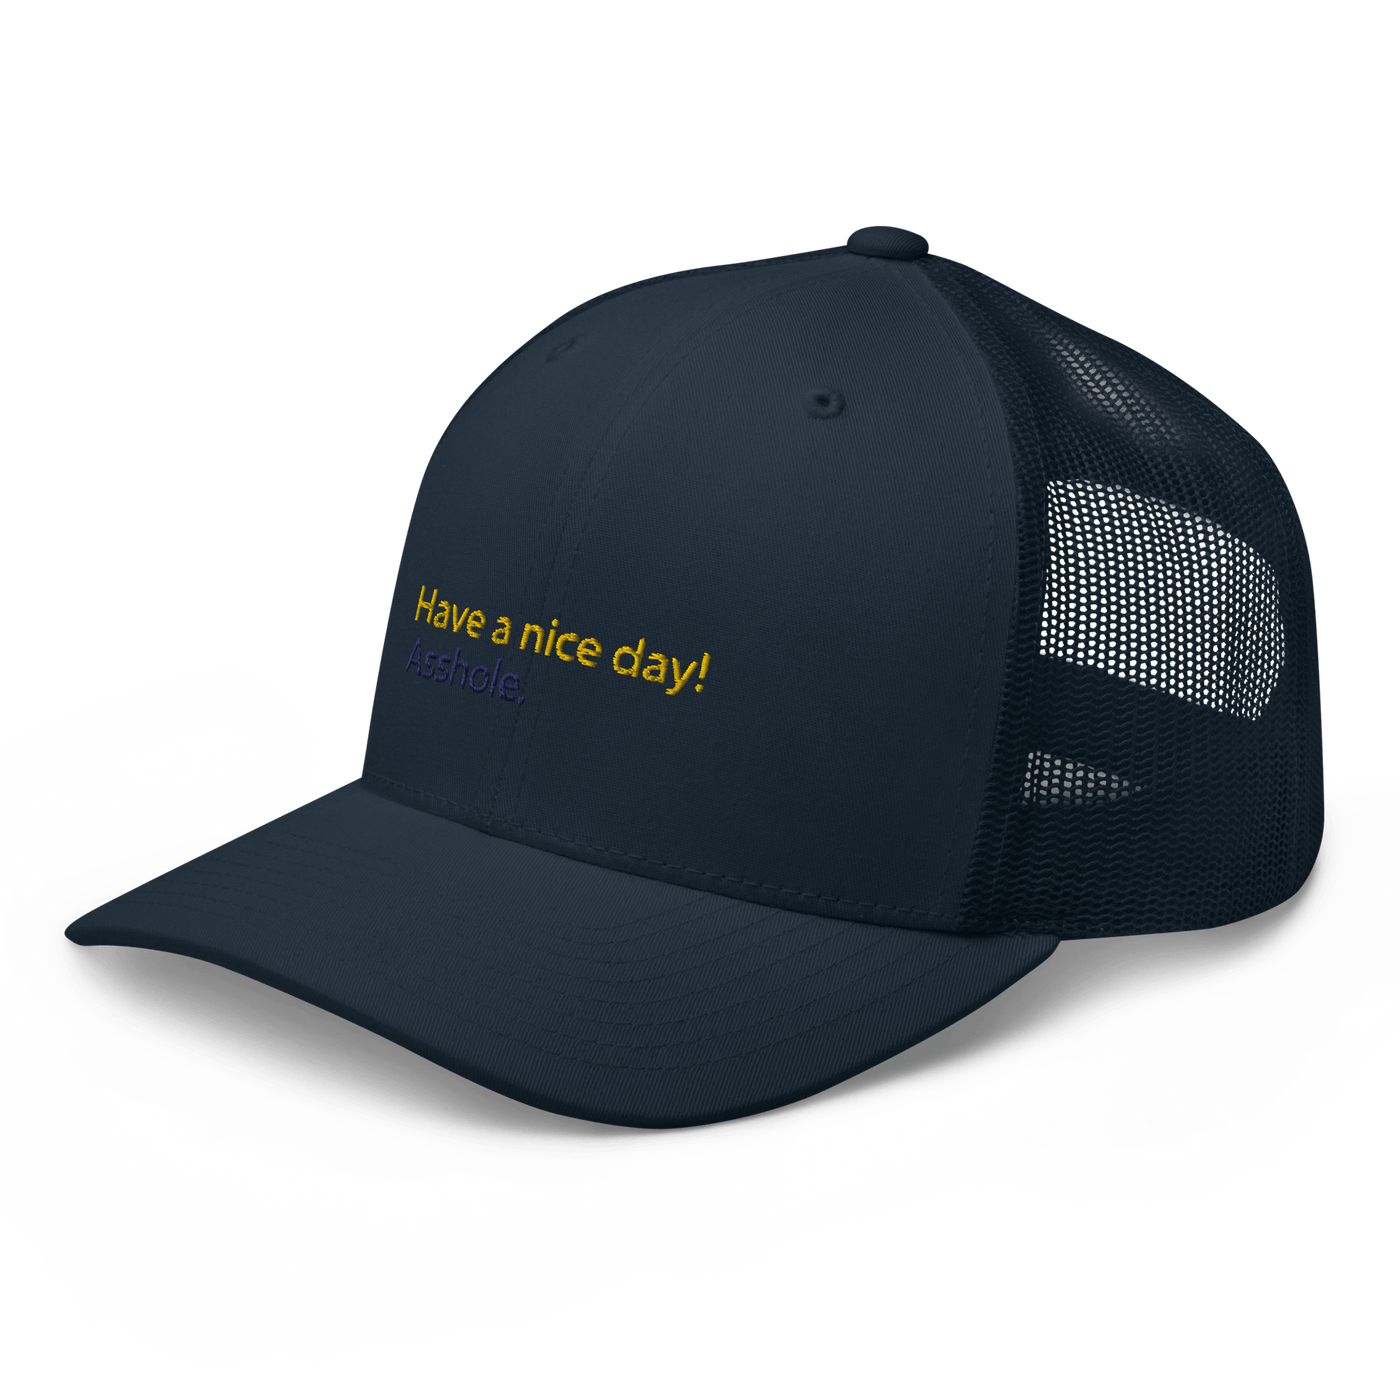 Have a nice day! (asshole) Trucker Cap - Navy - - Just Another Cap Store